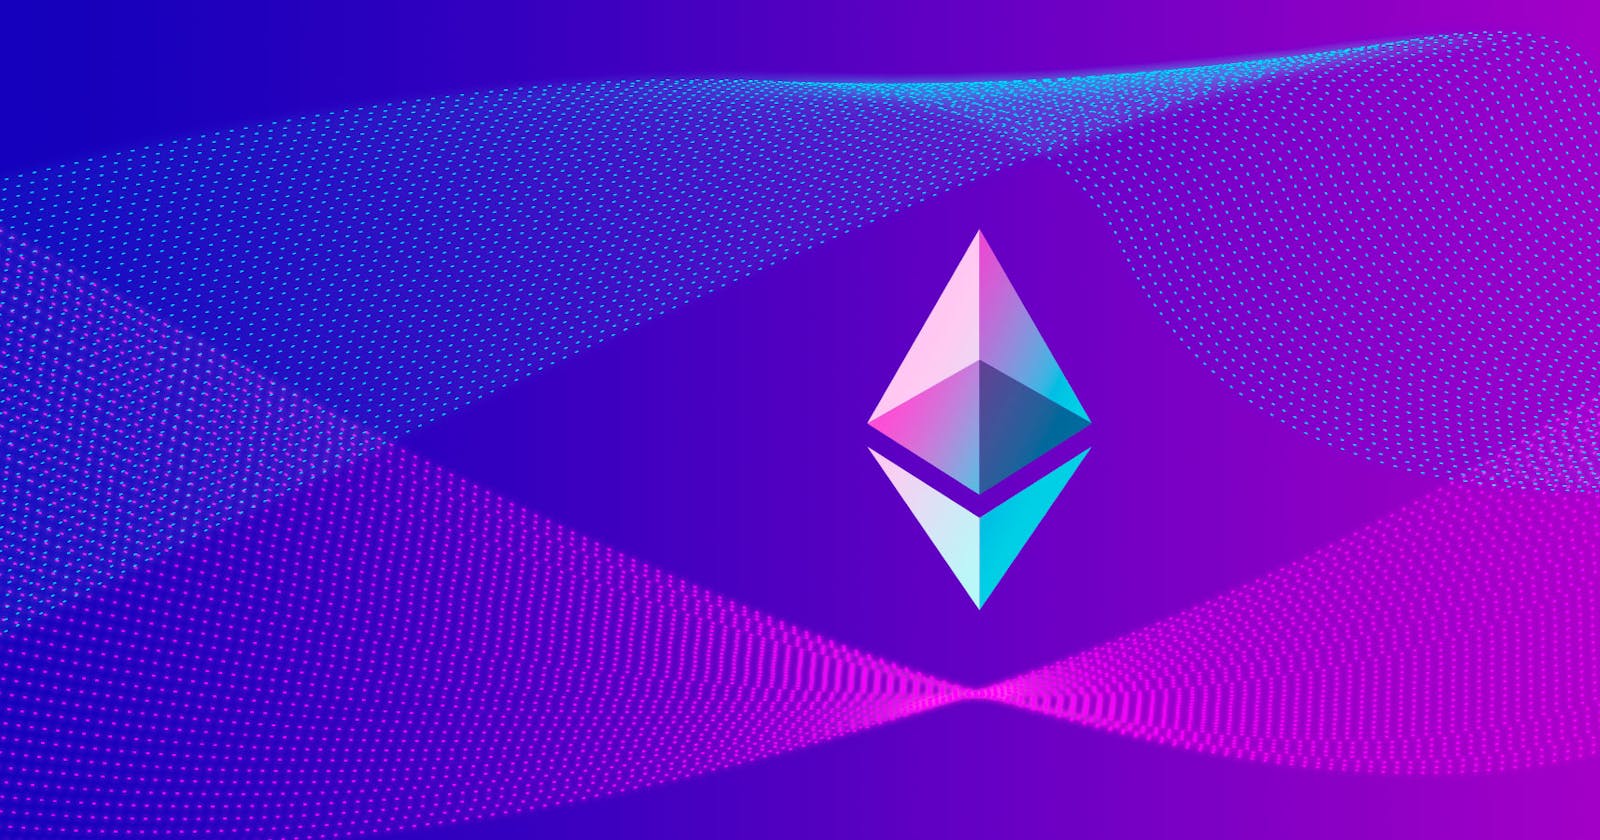 Finalized no. 26
the Ethereum consensus-layer